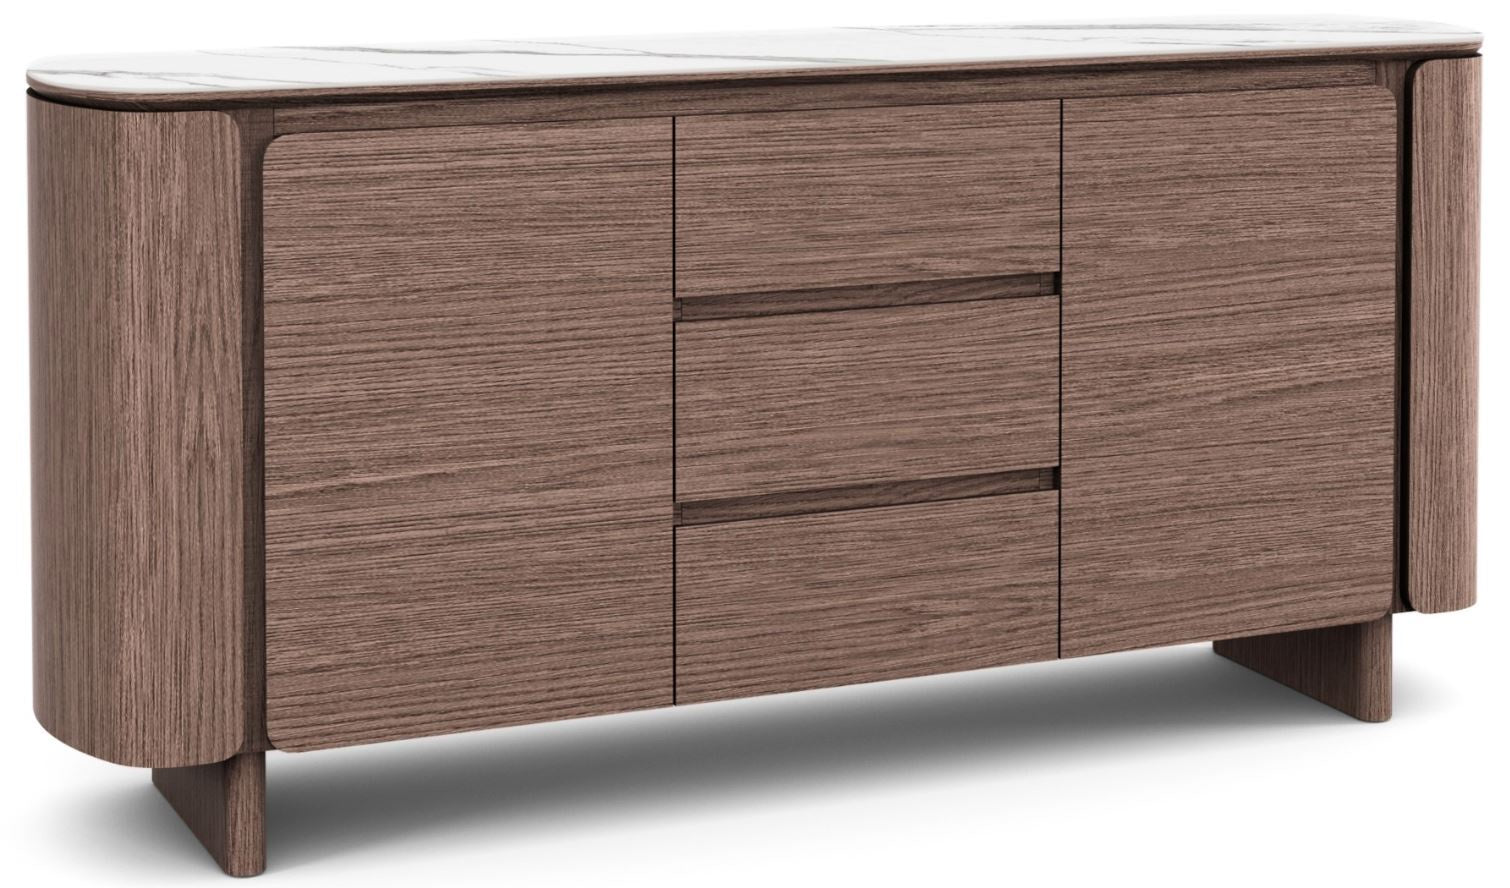 Trentino Sintered Stone Top Sideboard